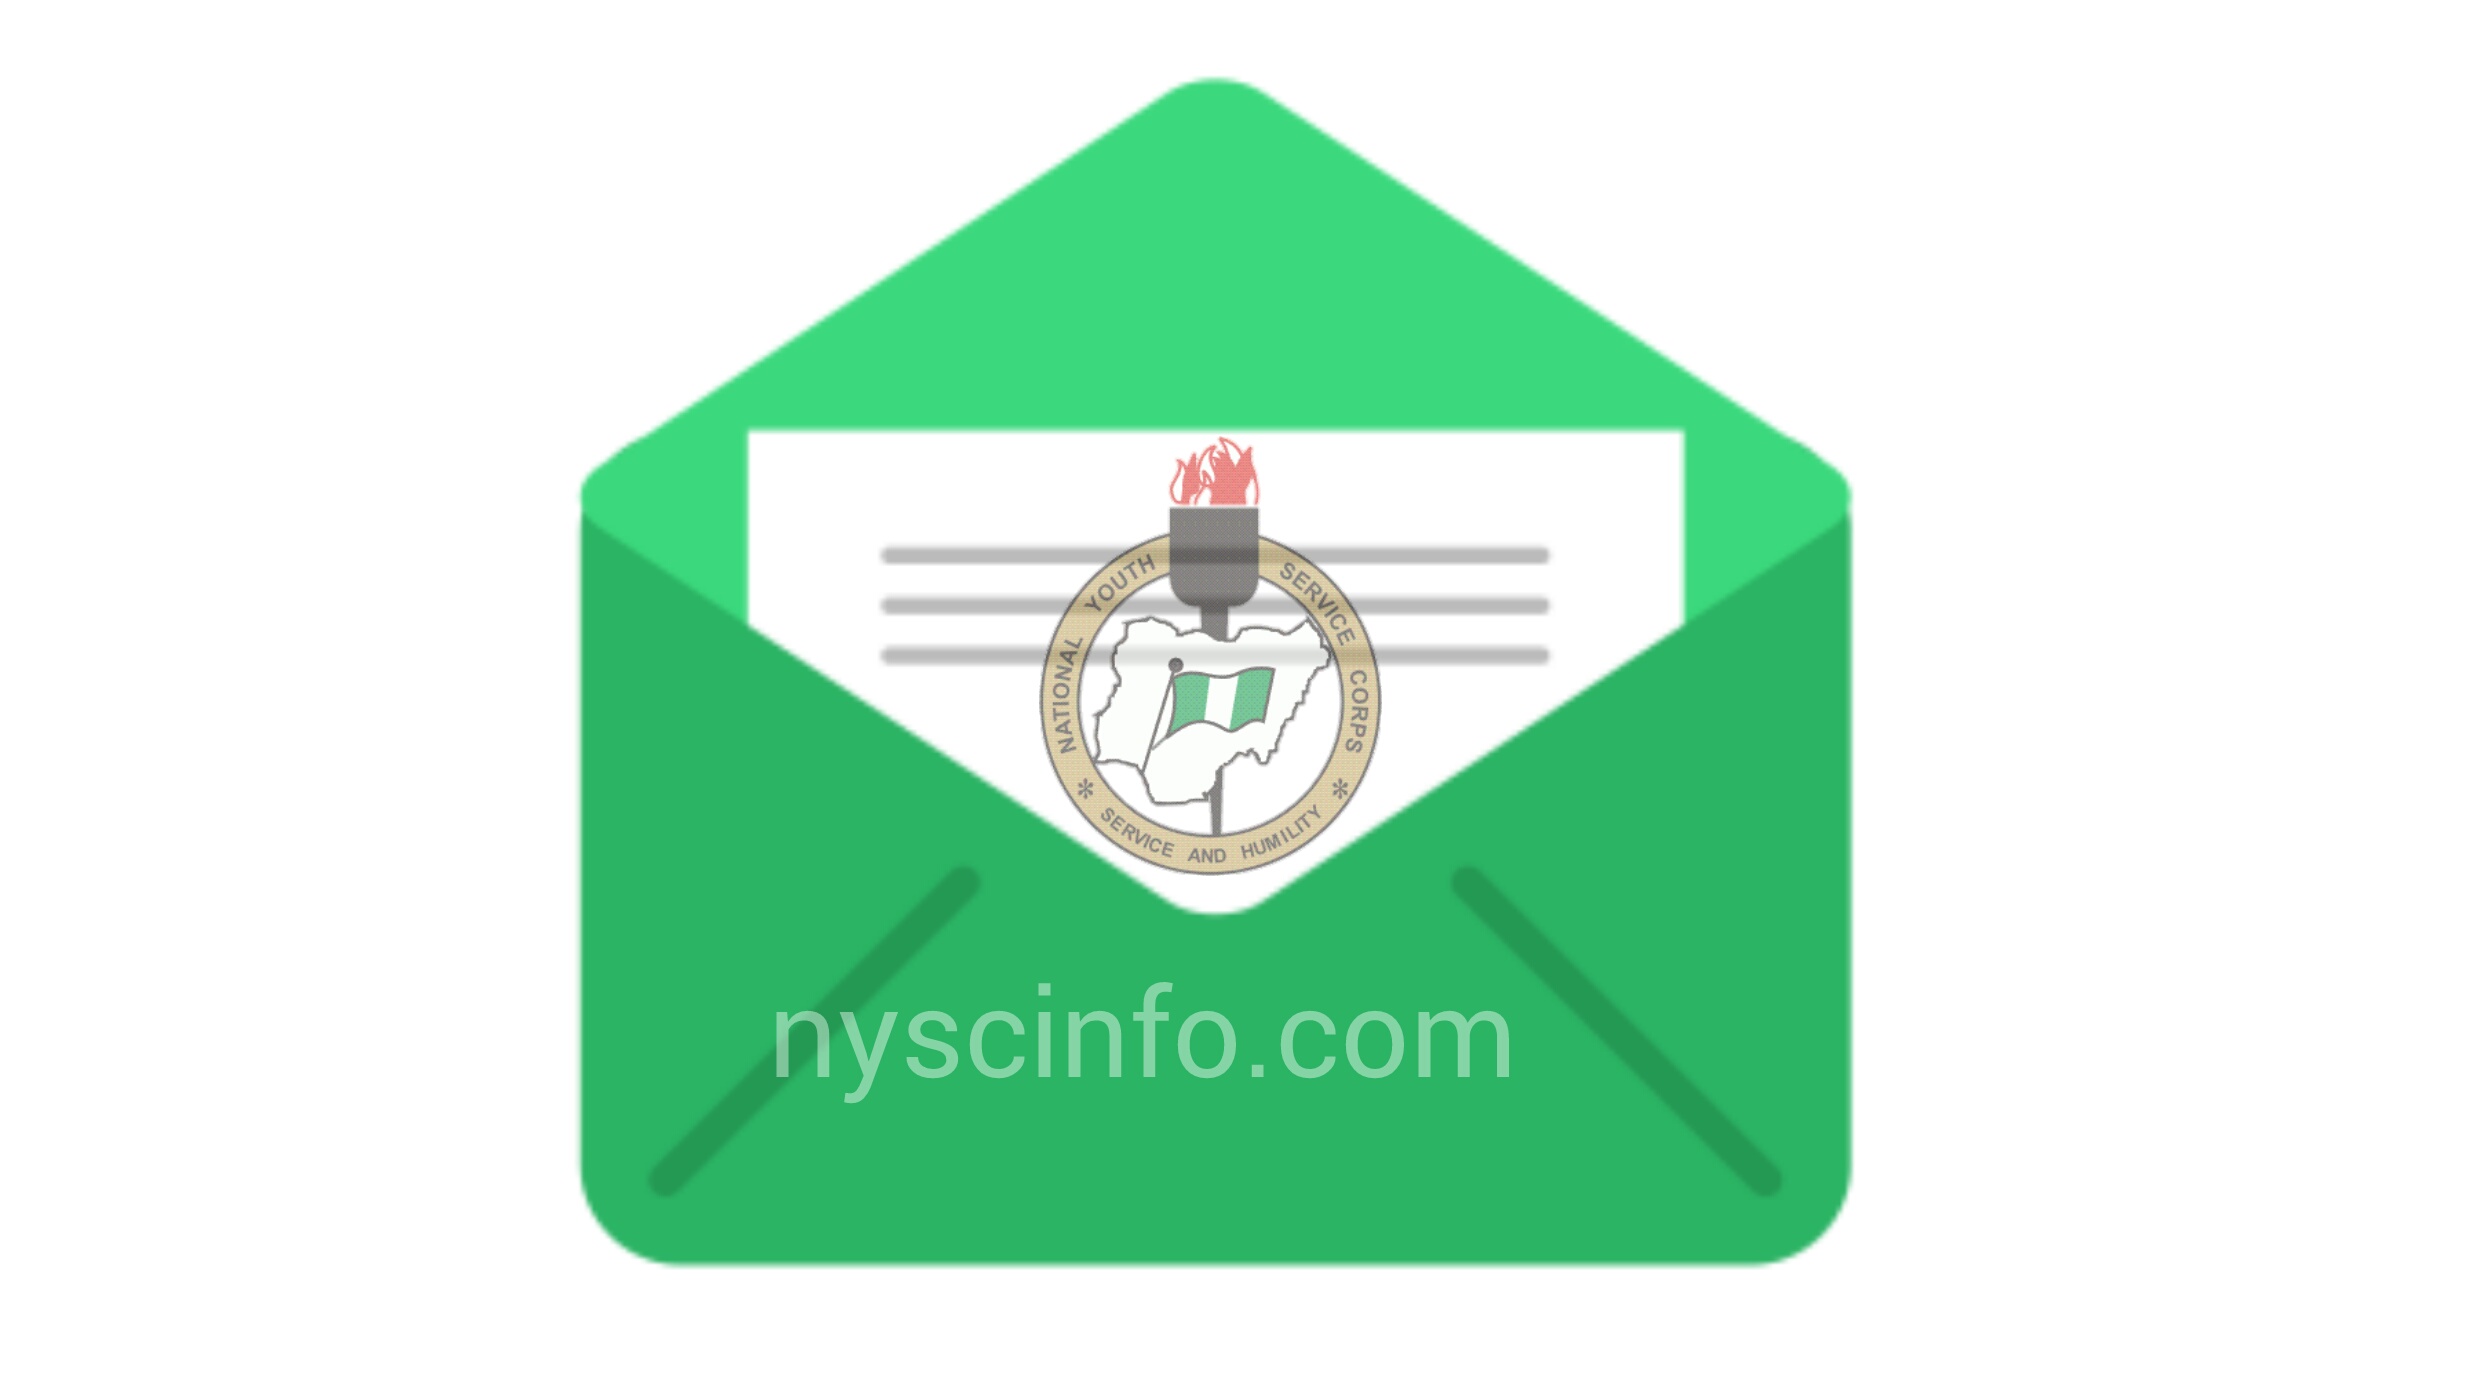 Nysc letter of request